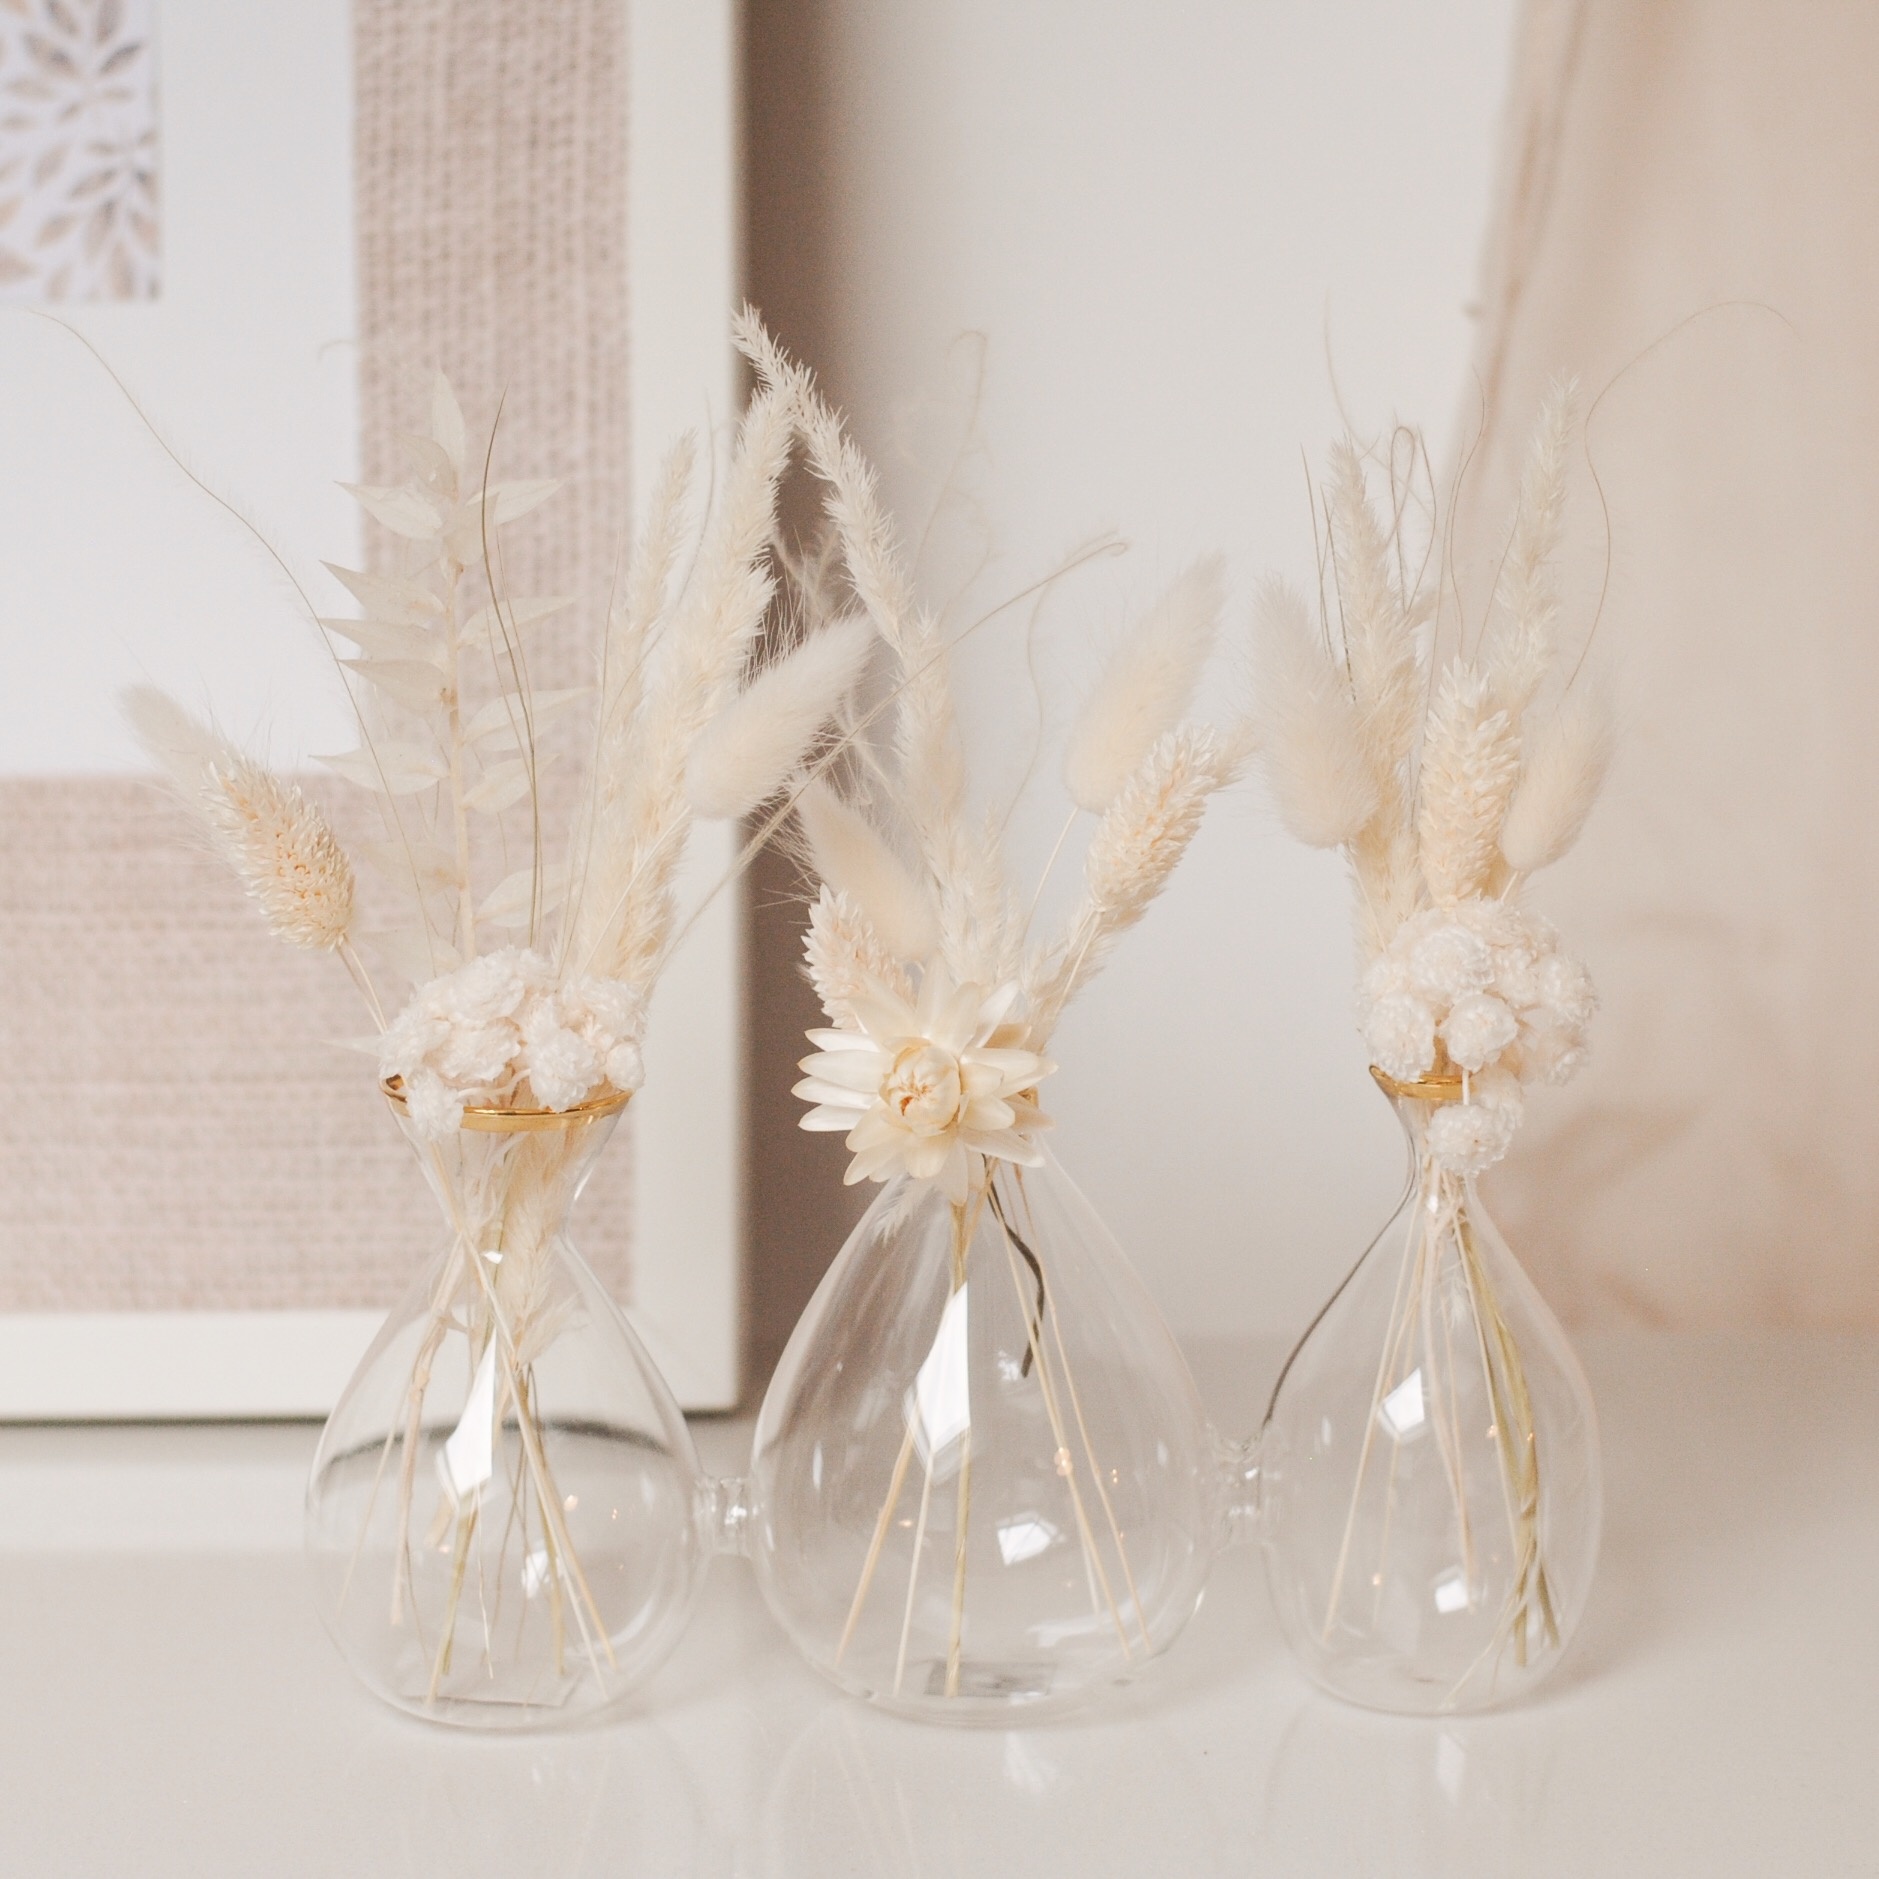 GLASS VASES WITH GOLD RIM